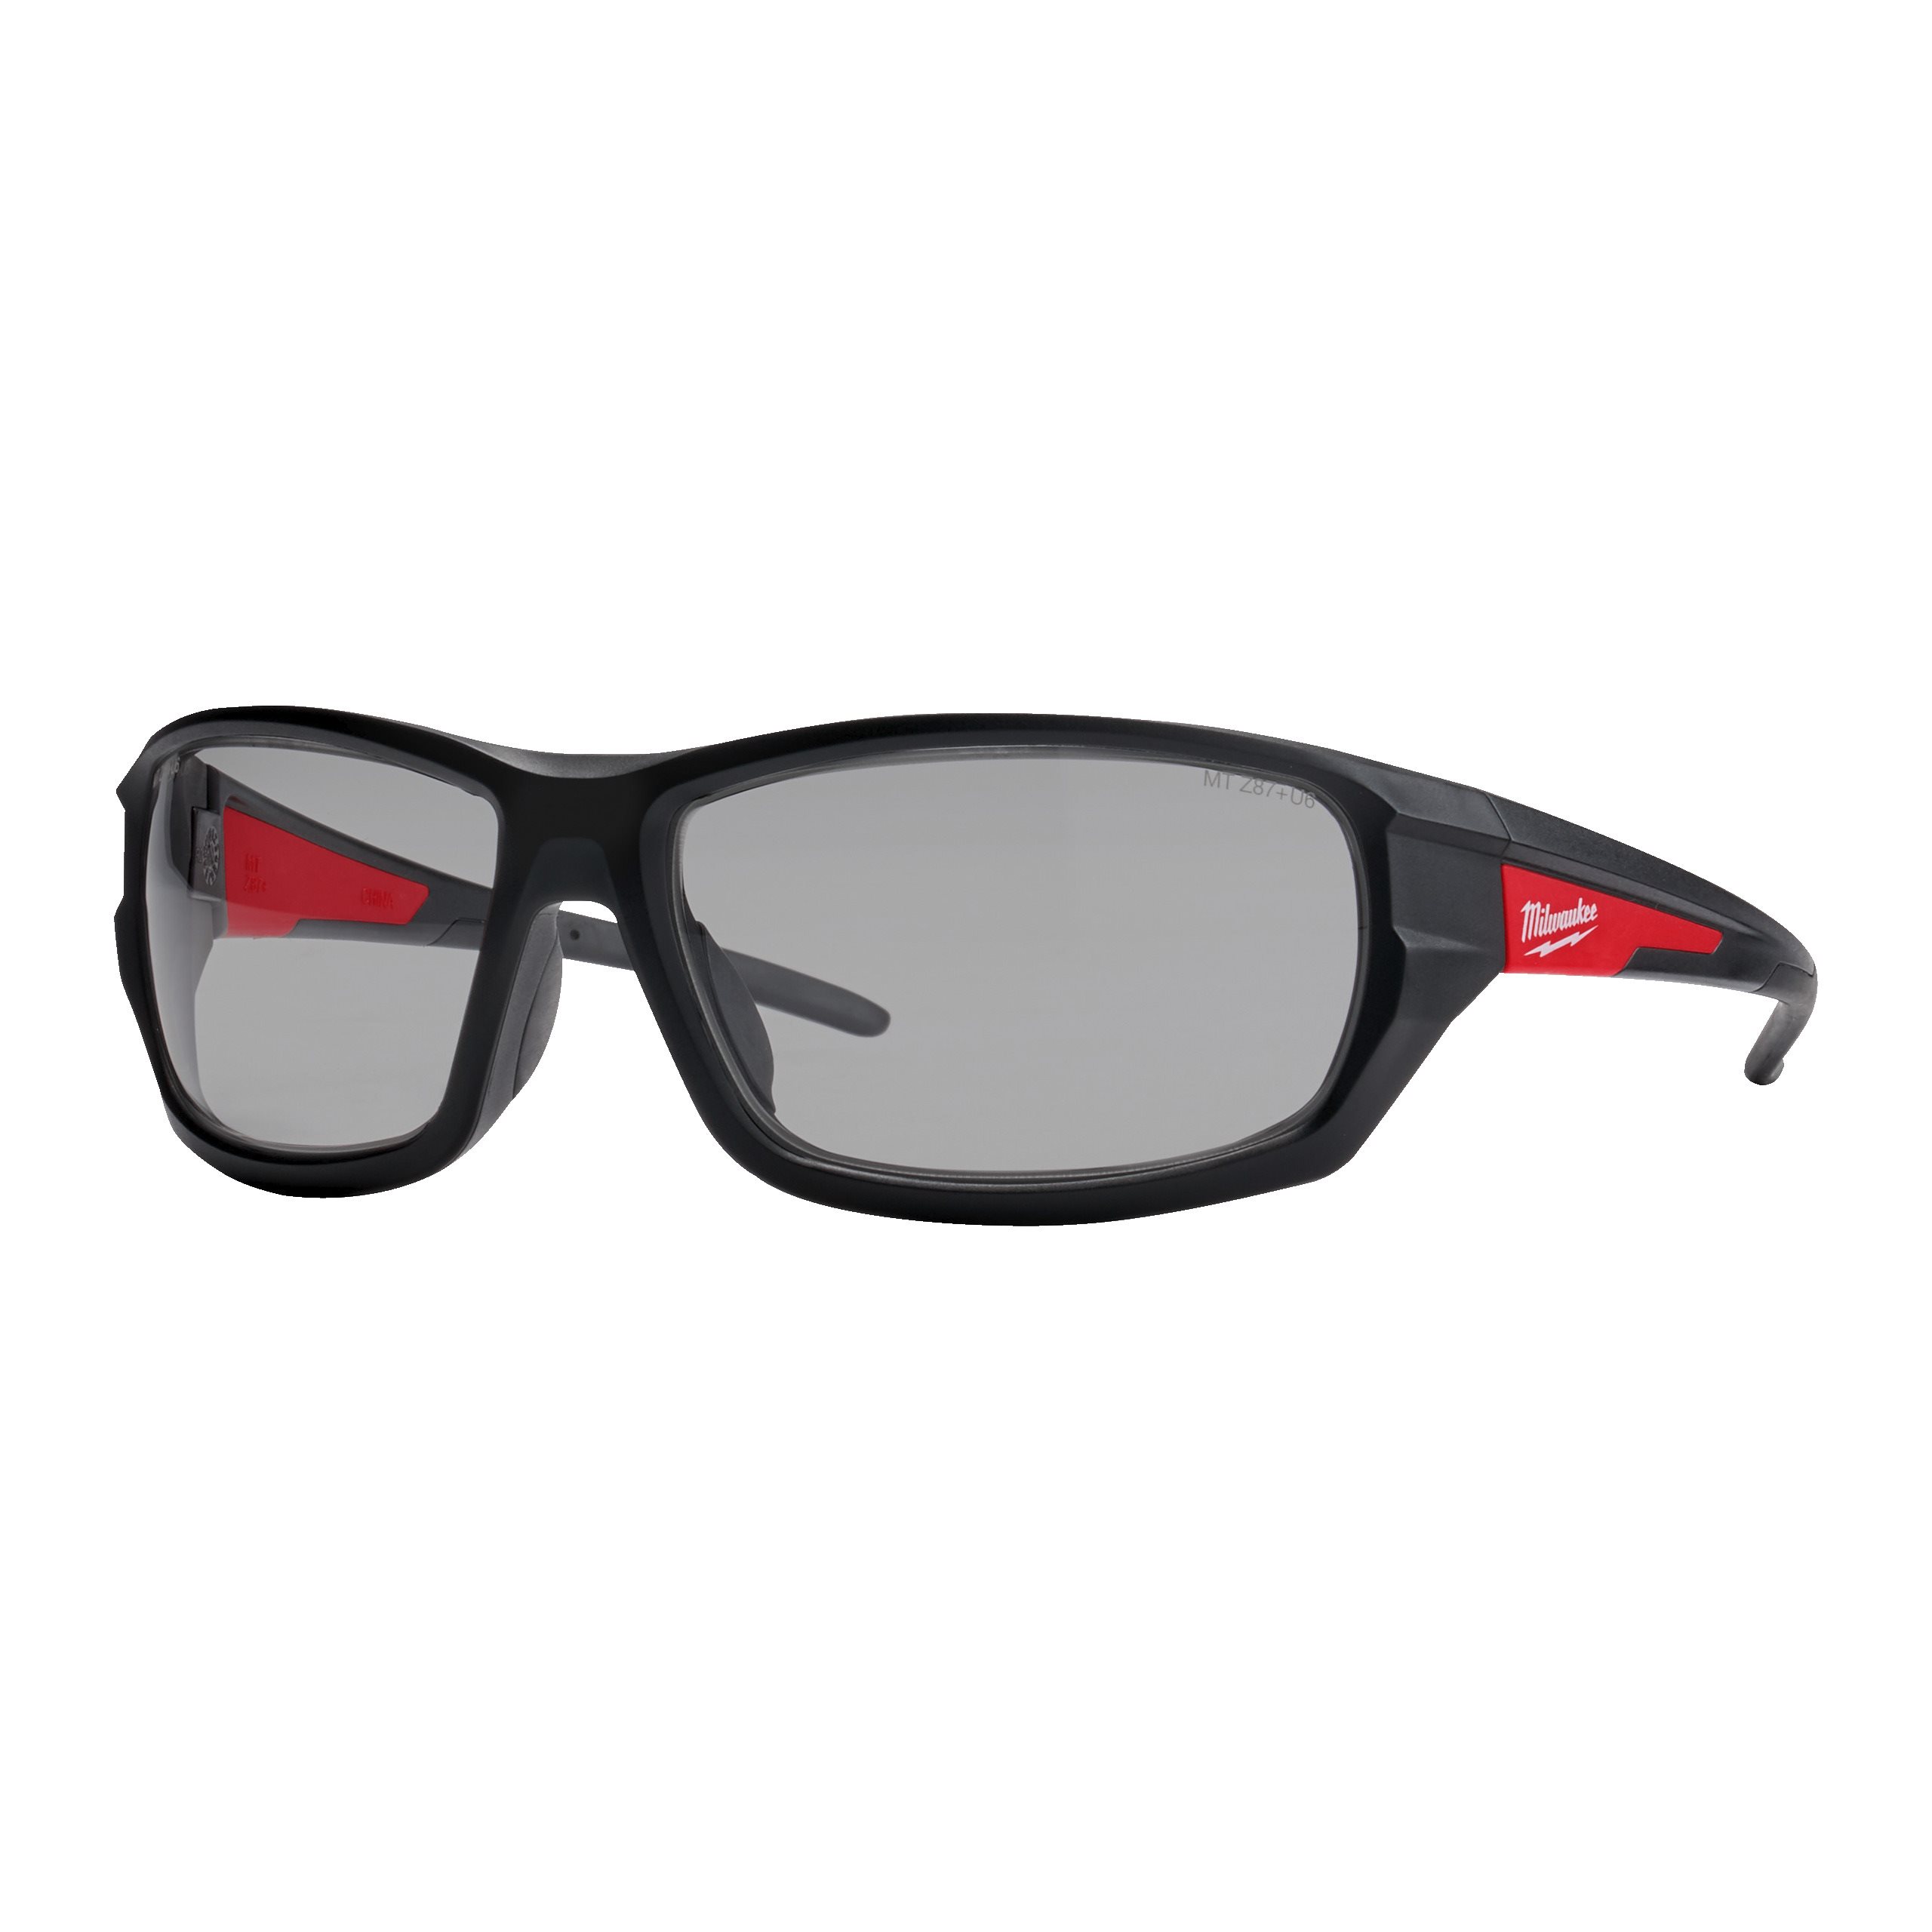 Milwaukee 48-73-2021 Performance Safety Clear Glasses for sale online 